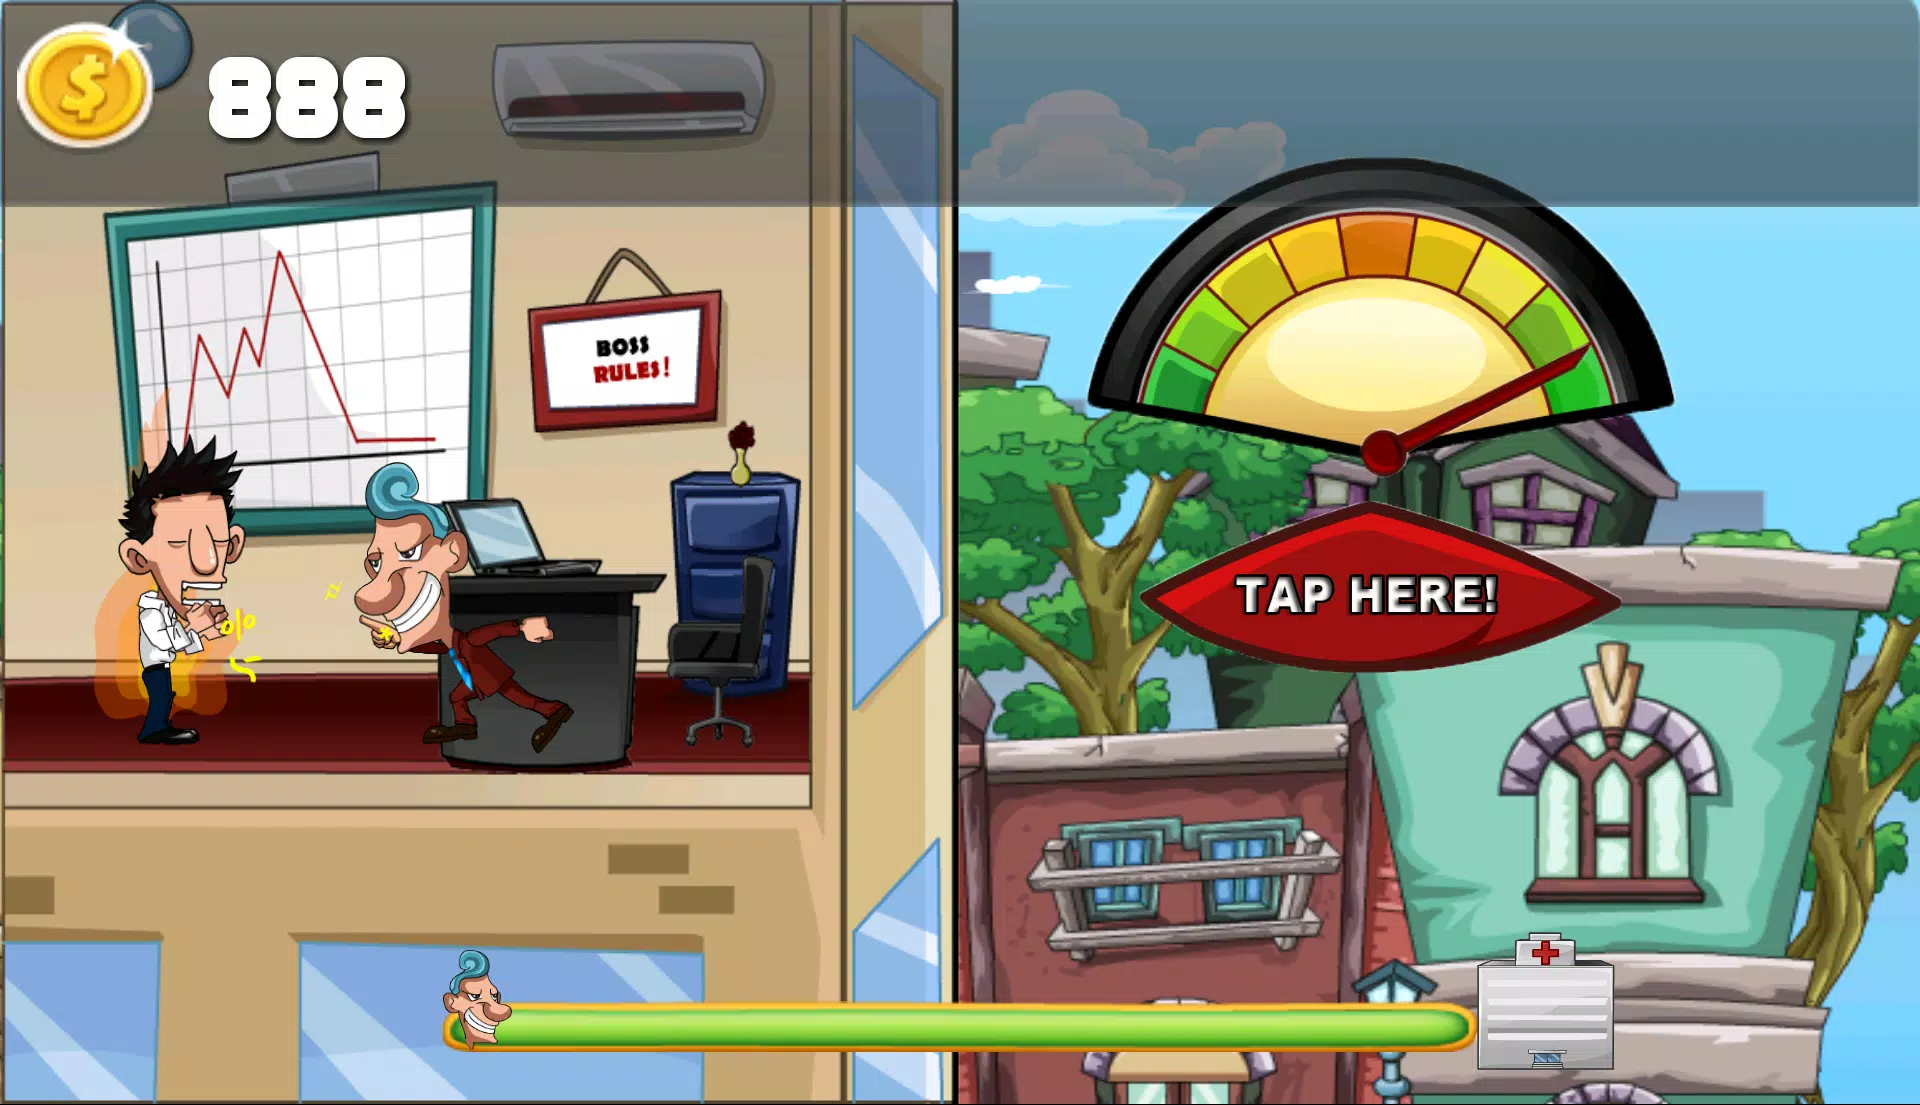 Kick Your Boss Fly for Android - APK Download